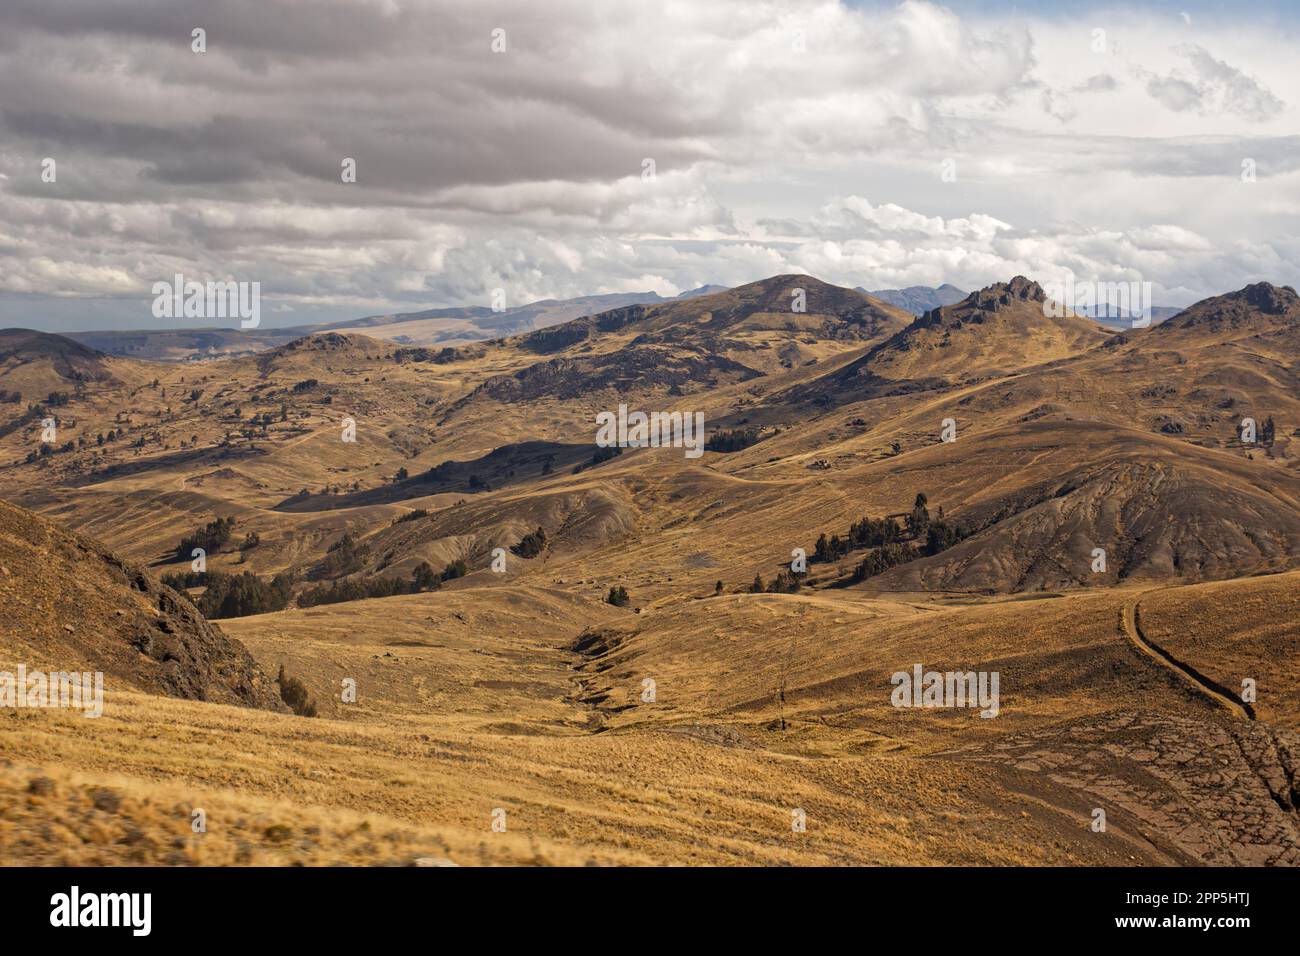 A cloudy morning landscape of the hills near Lake Titicaca, La Paz department, Bolivia Stock Photo